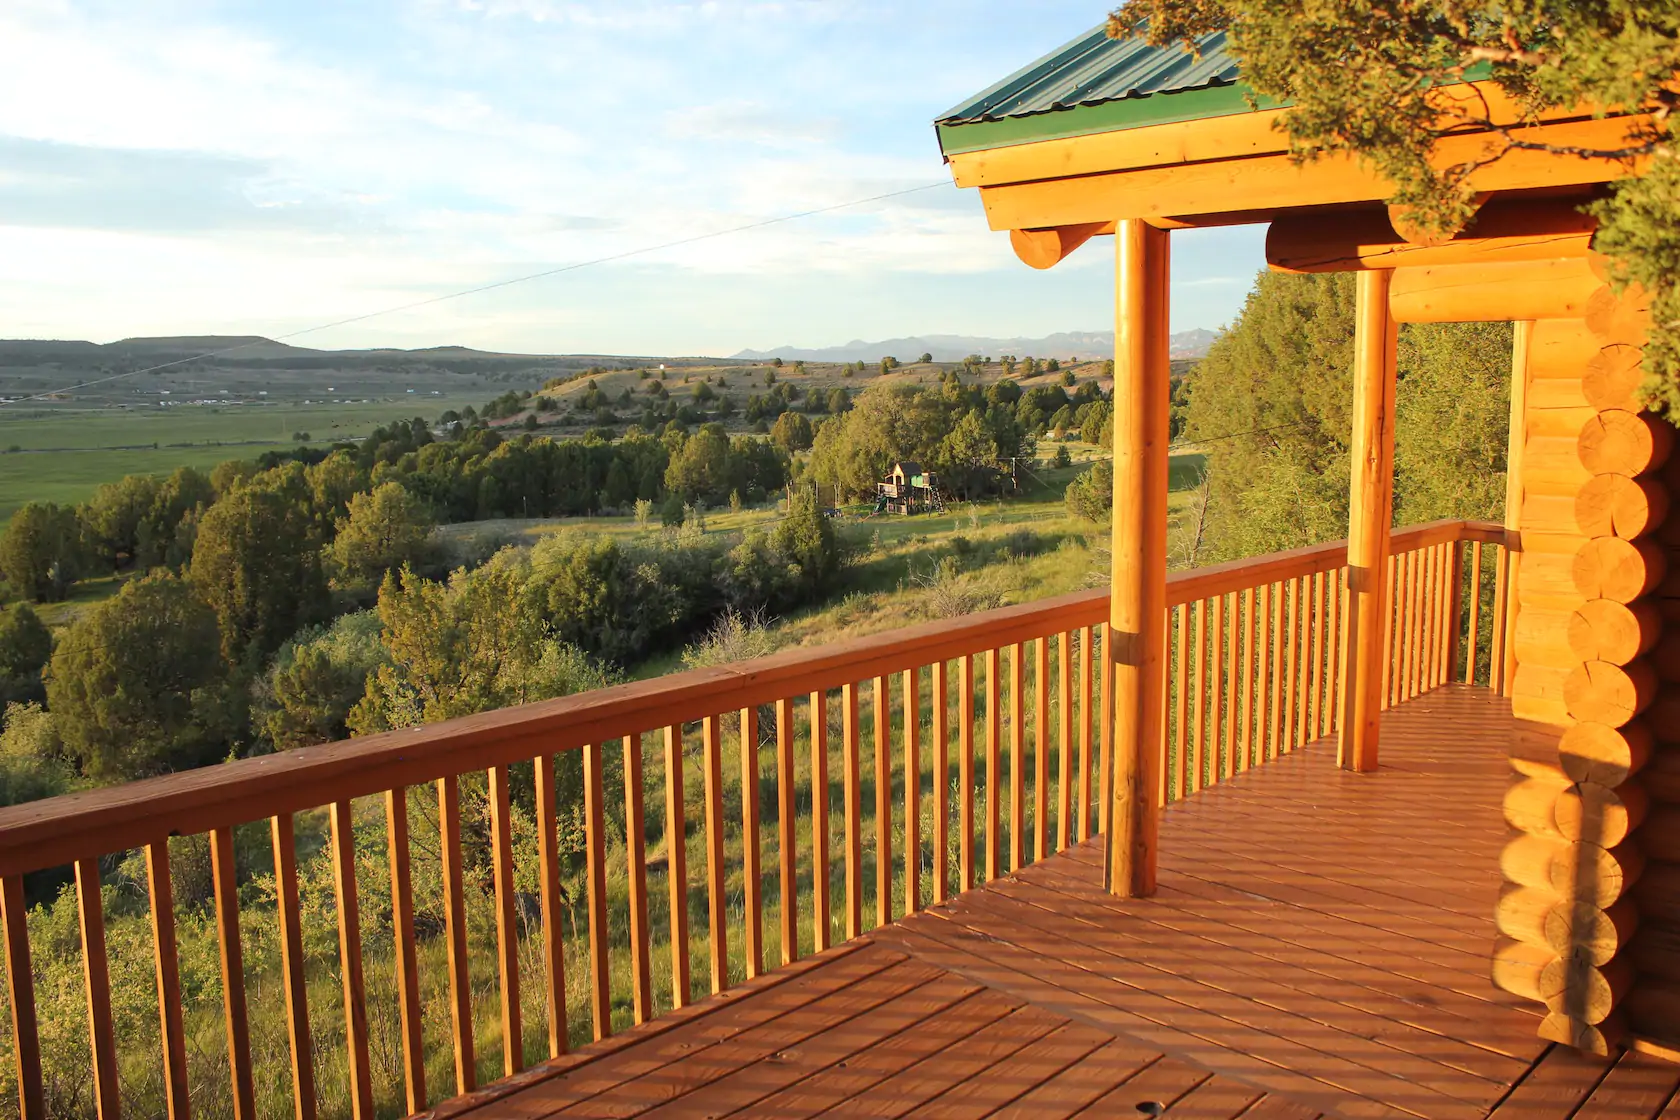 a View from the cabin deck overlooking the lush scenery 